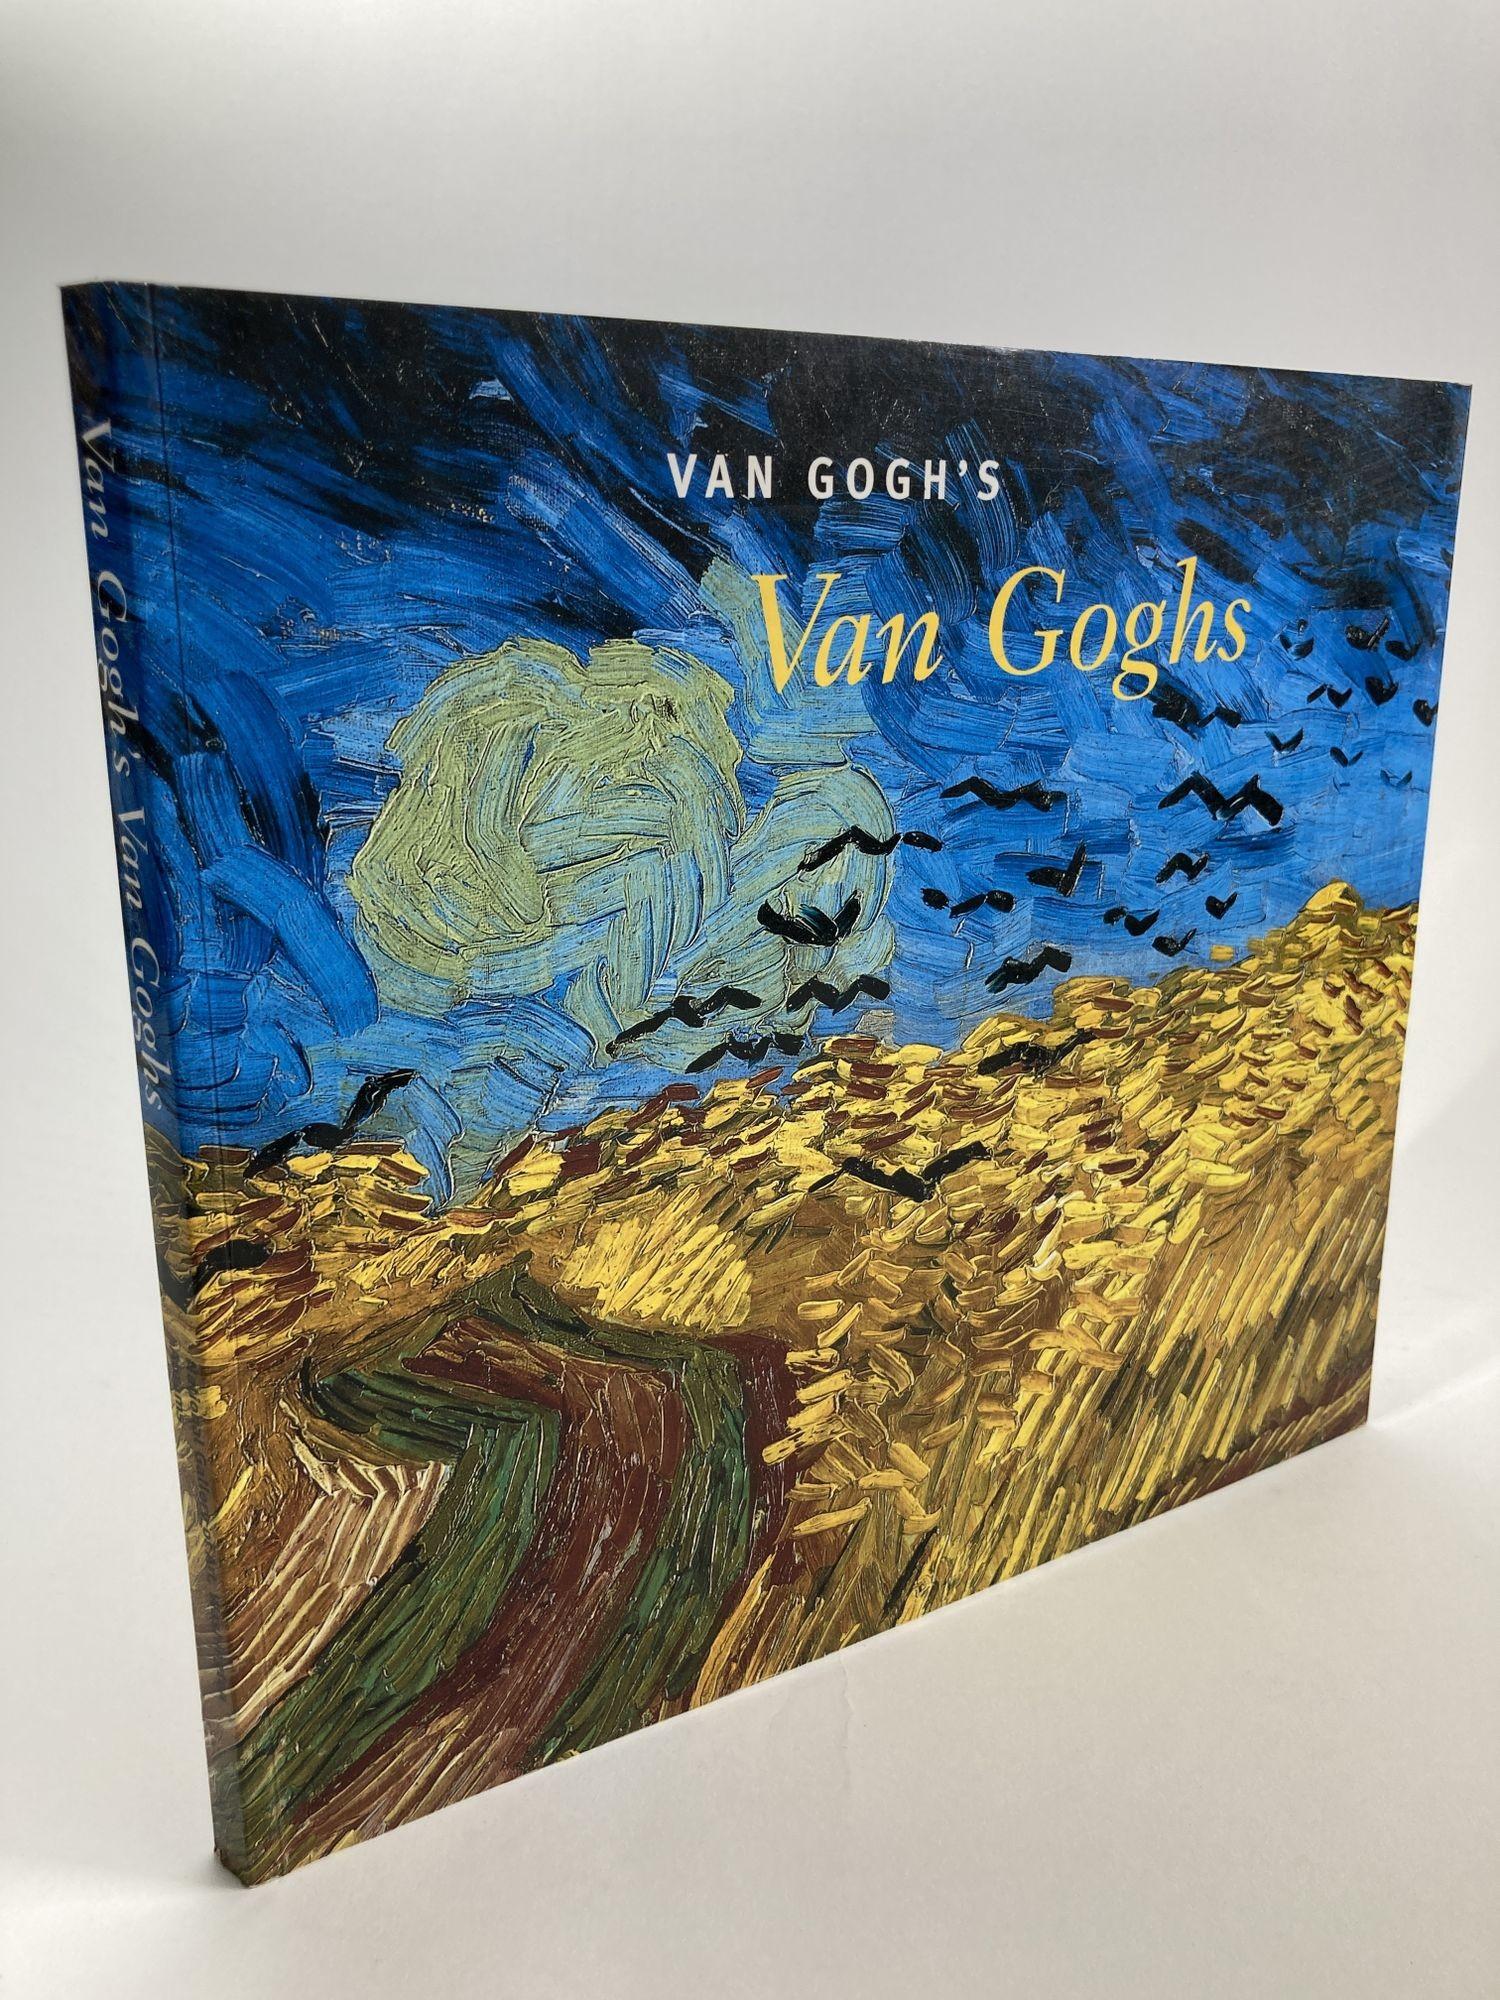 Van Gogh's Van Goghs: Masterpieces from the Van Gogh Museum, Amsterdam Book In Good Condition For Sale In North Hollywood, CA